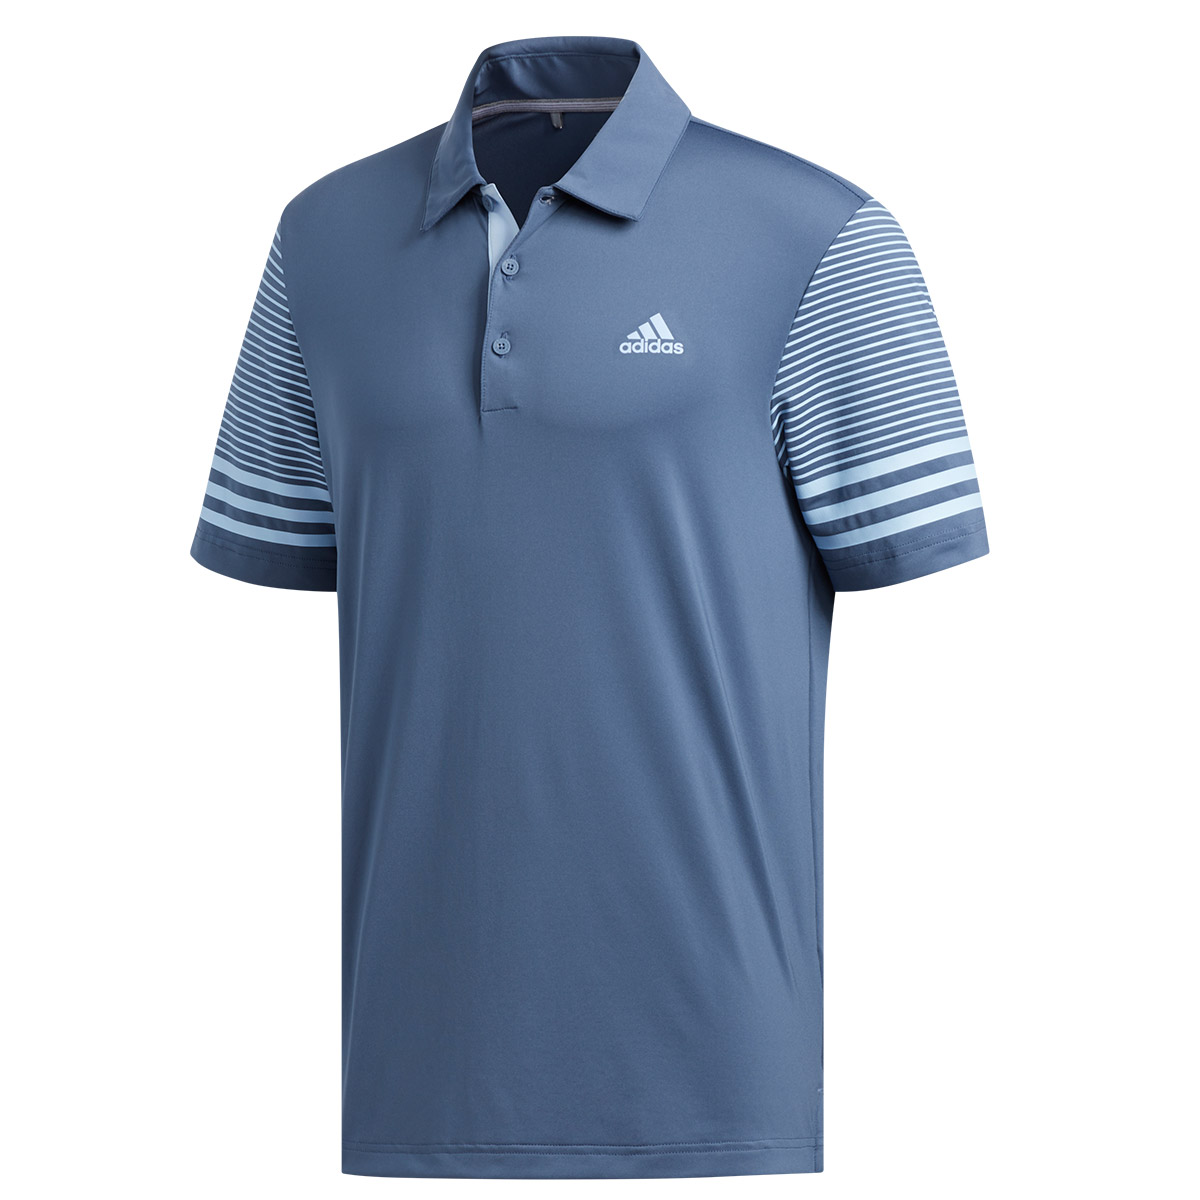 adidas Golf Ultimate Gradient Sleeve Polo Shirt from american golf